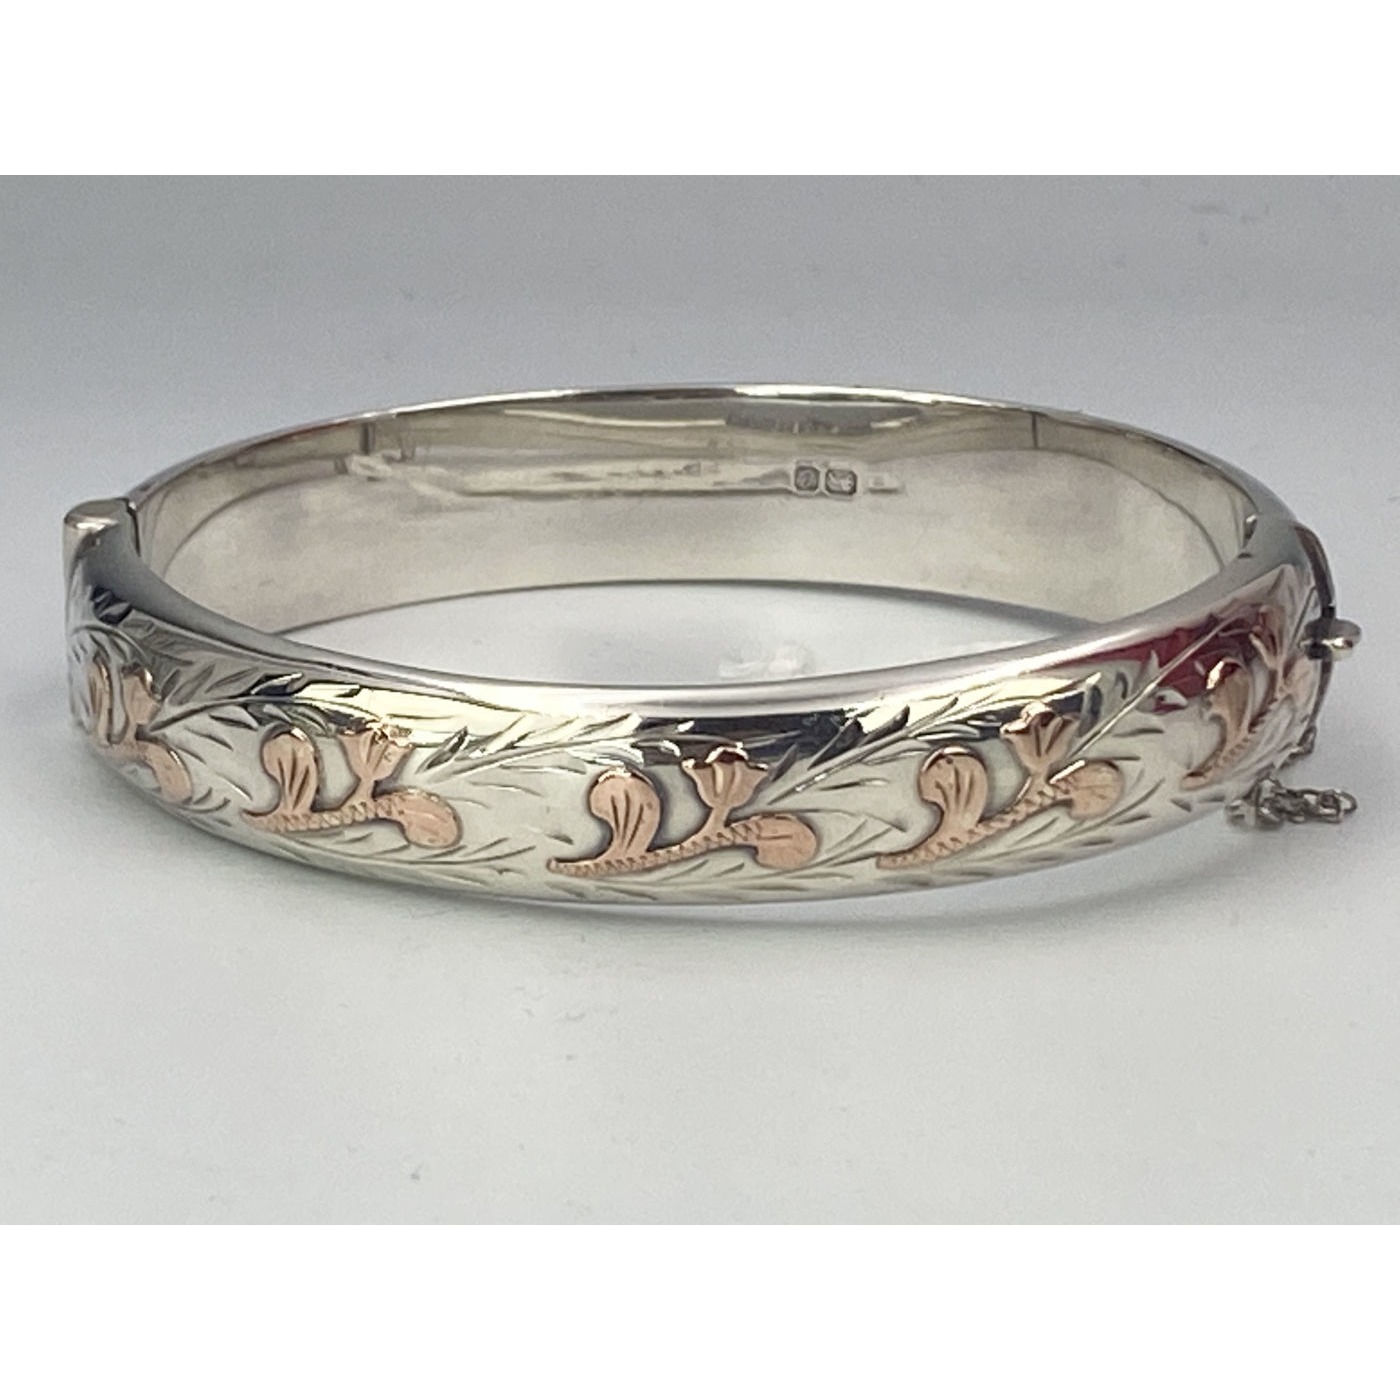 Rose Gold Small Tulip-style Decoration on a Narrow English Silver Bangle